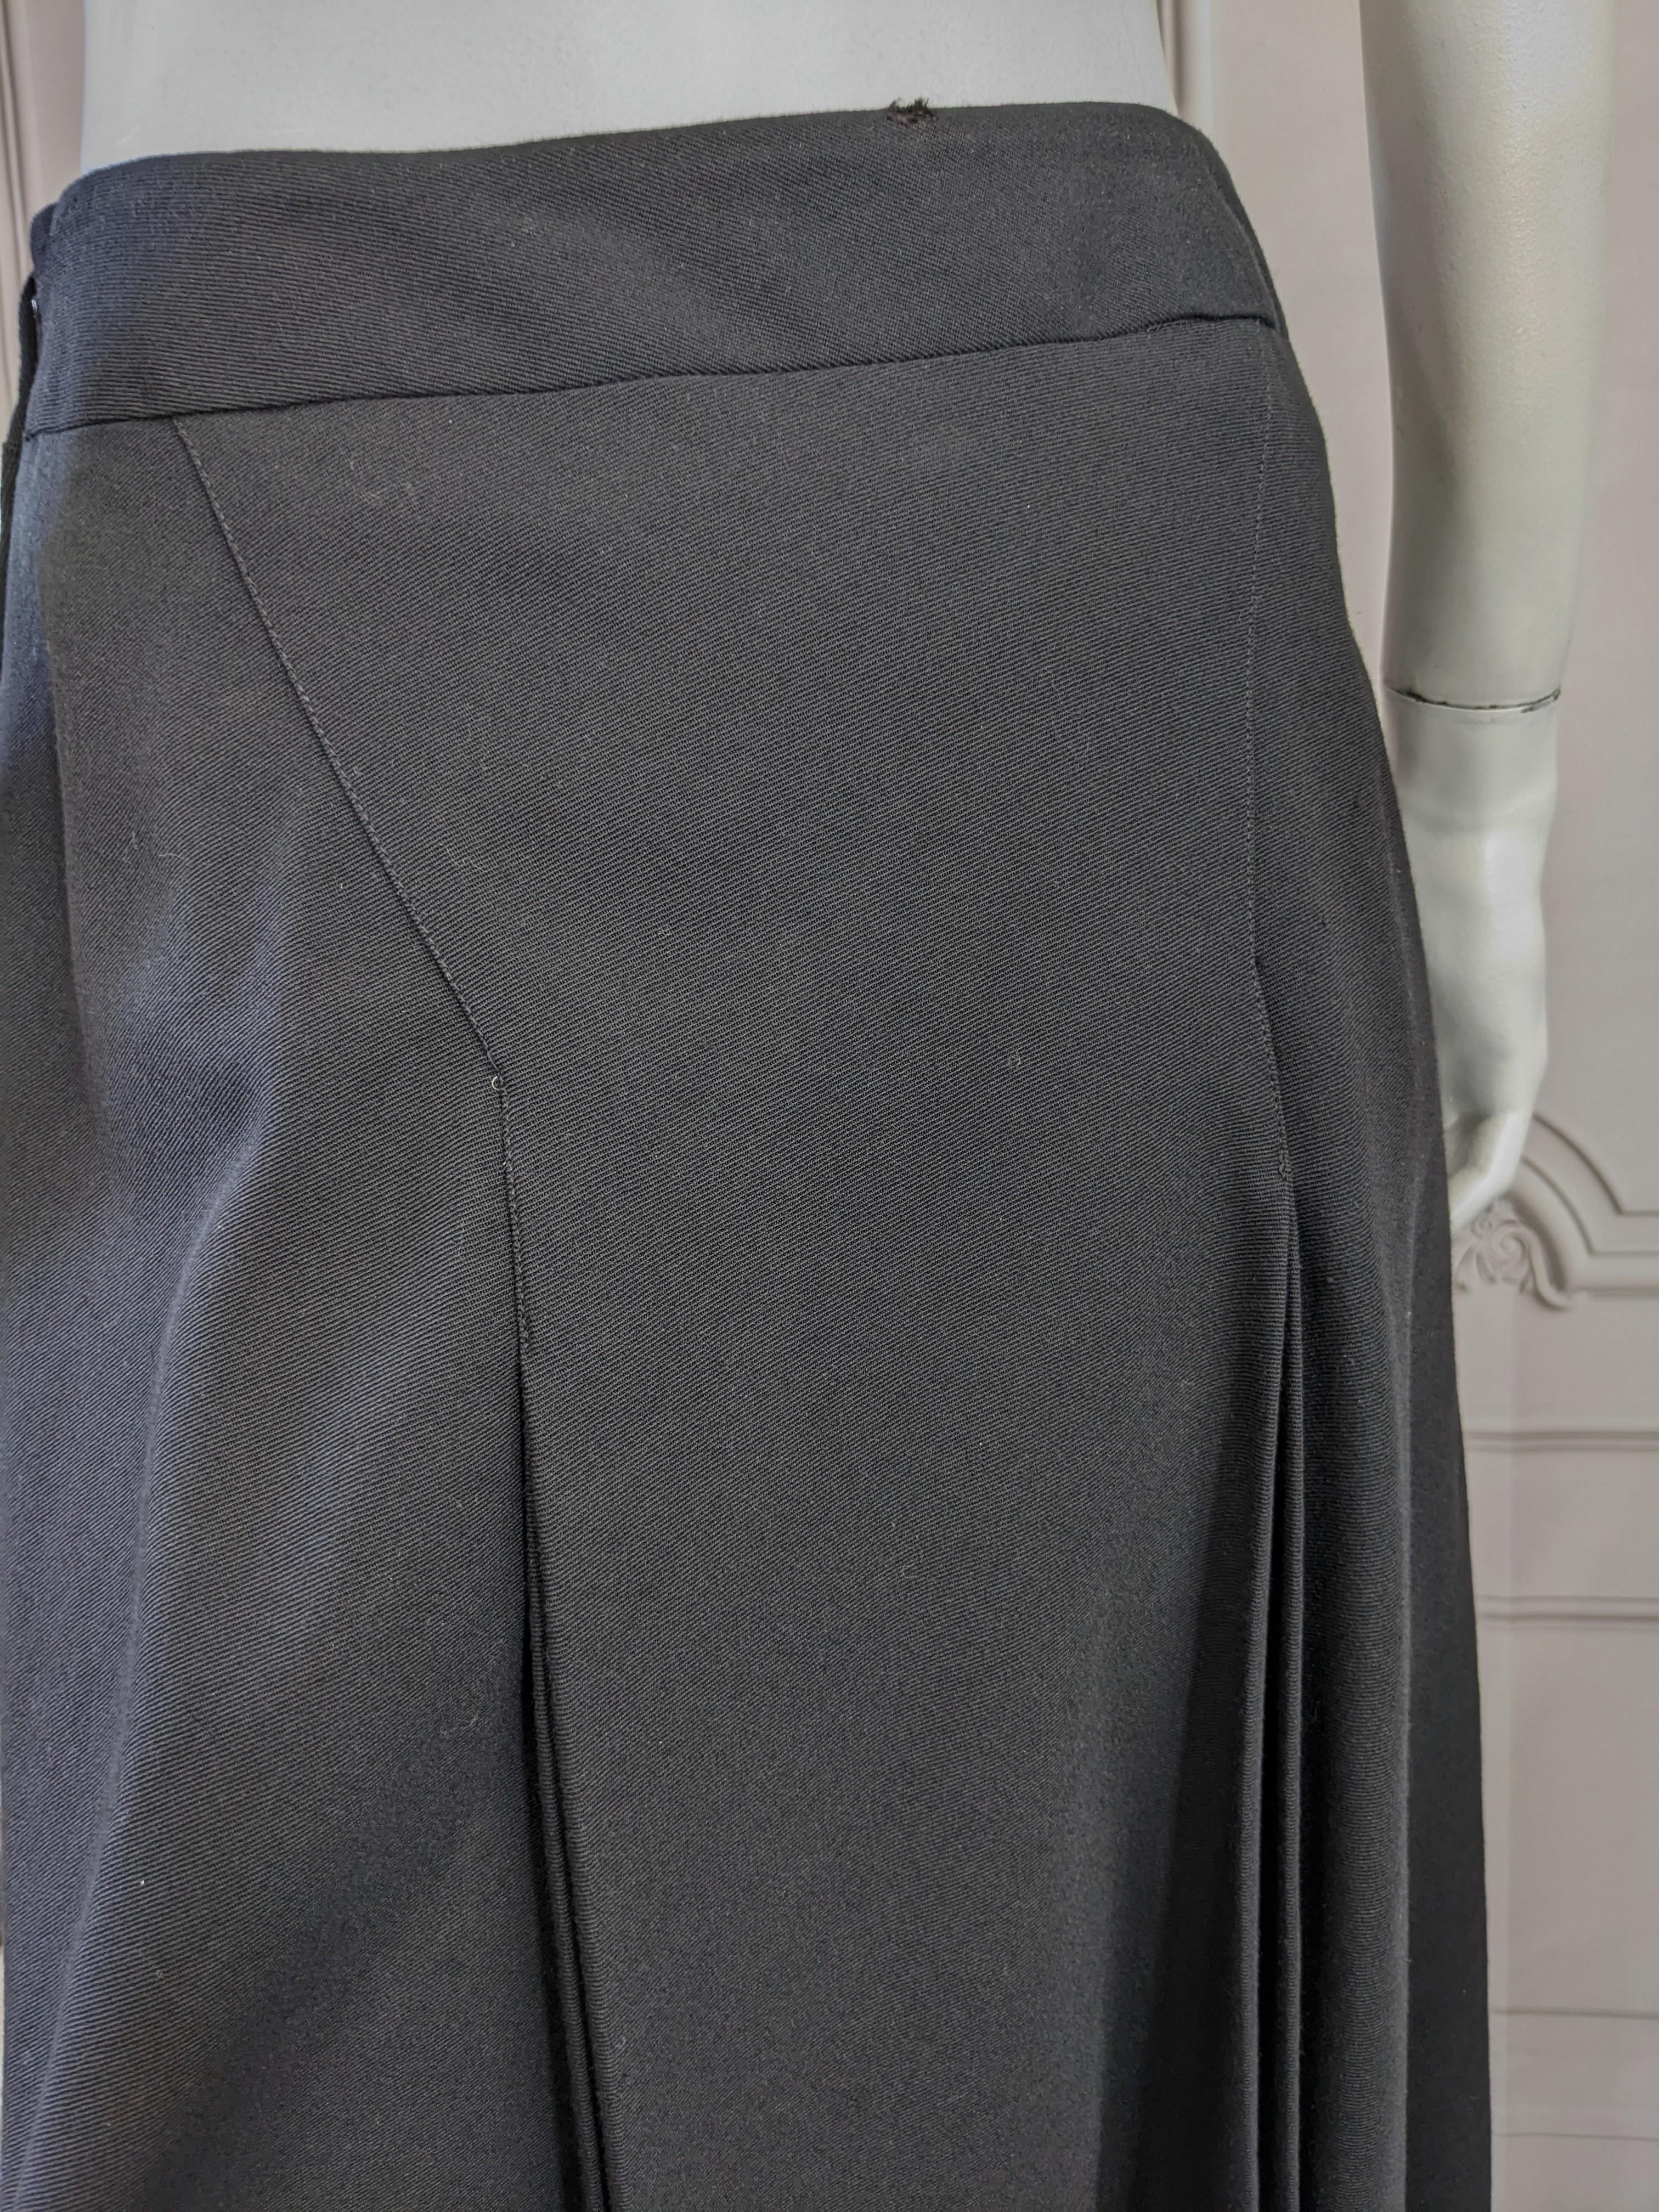 Cacharel Wool Twill Pleated A Line Skirt For Sale 4